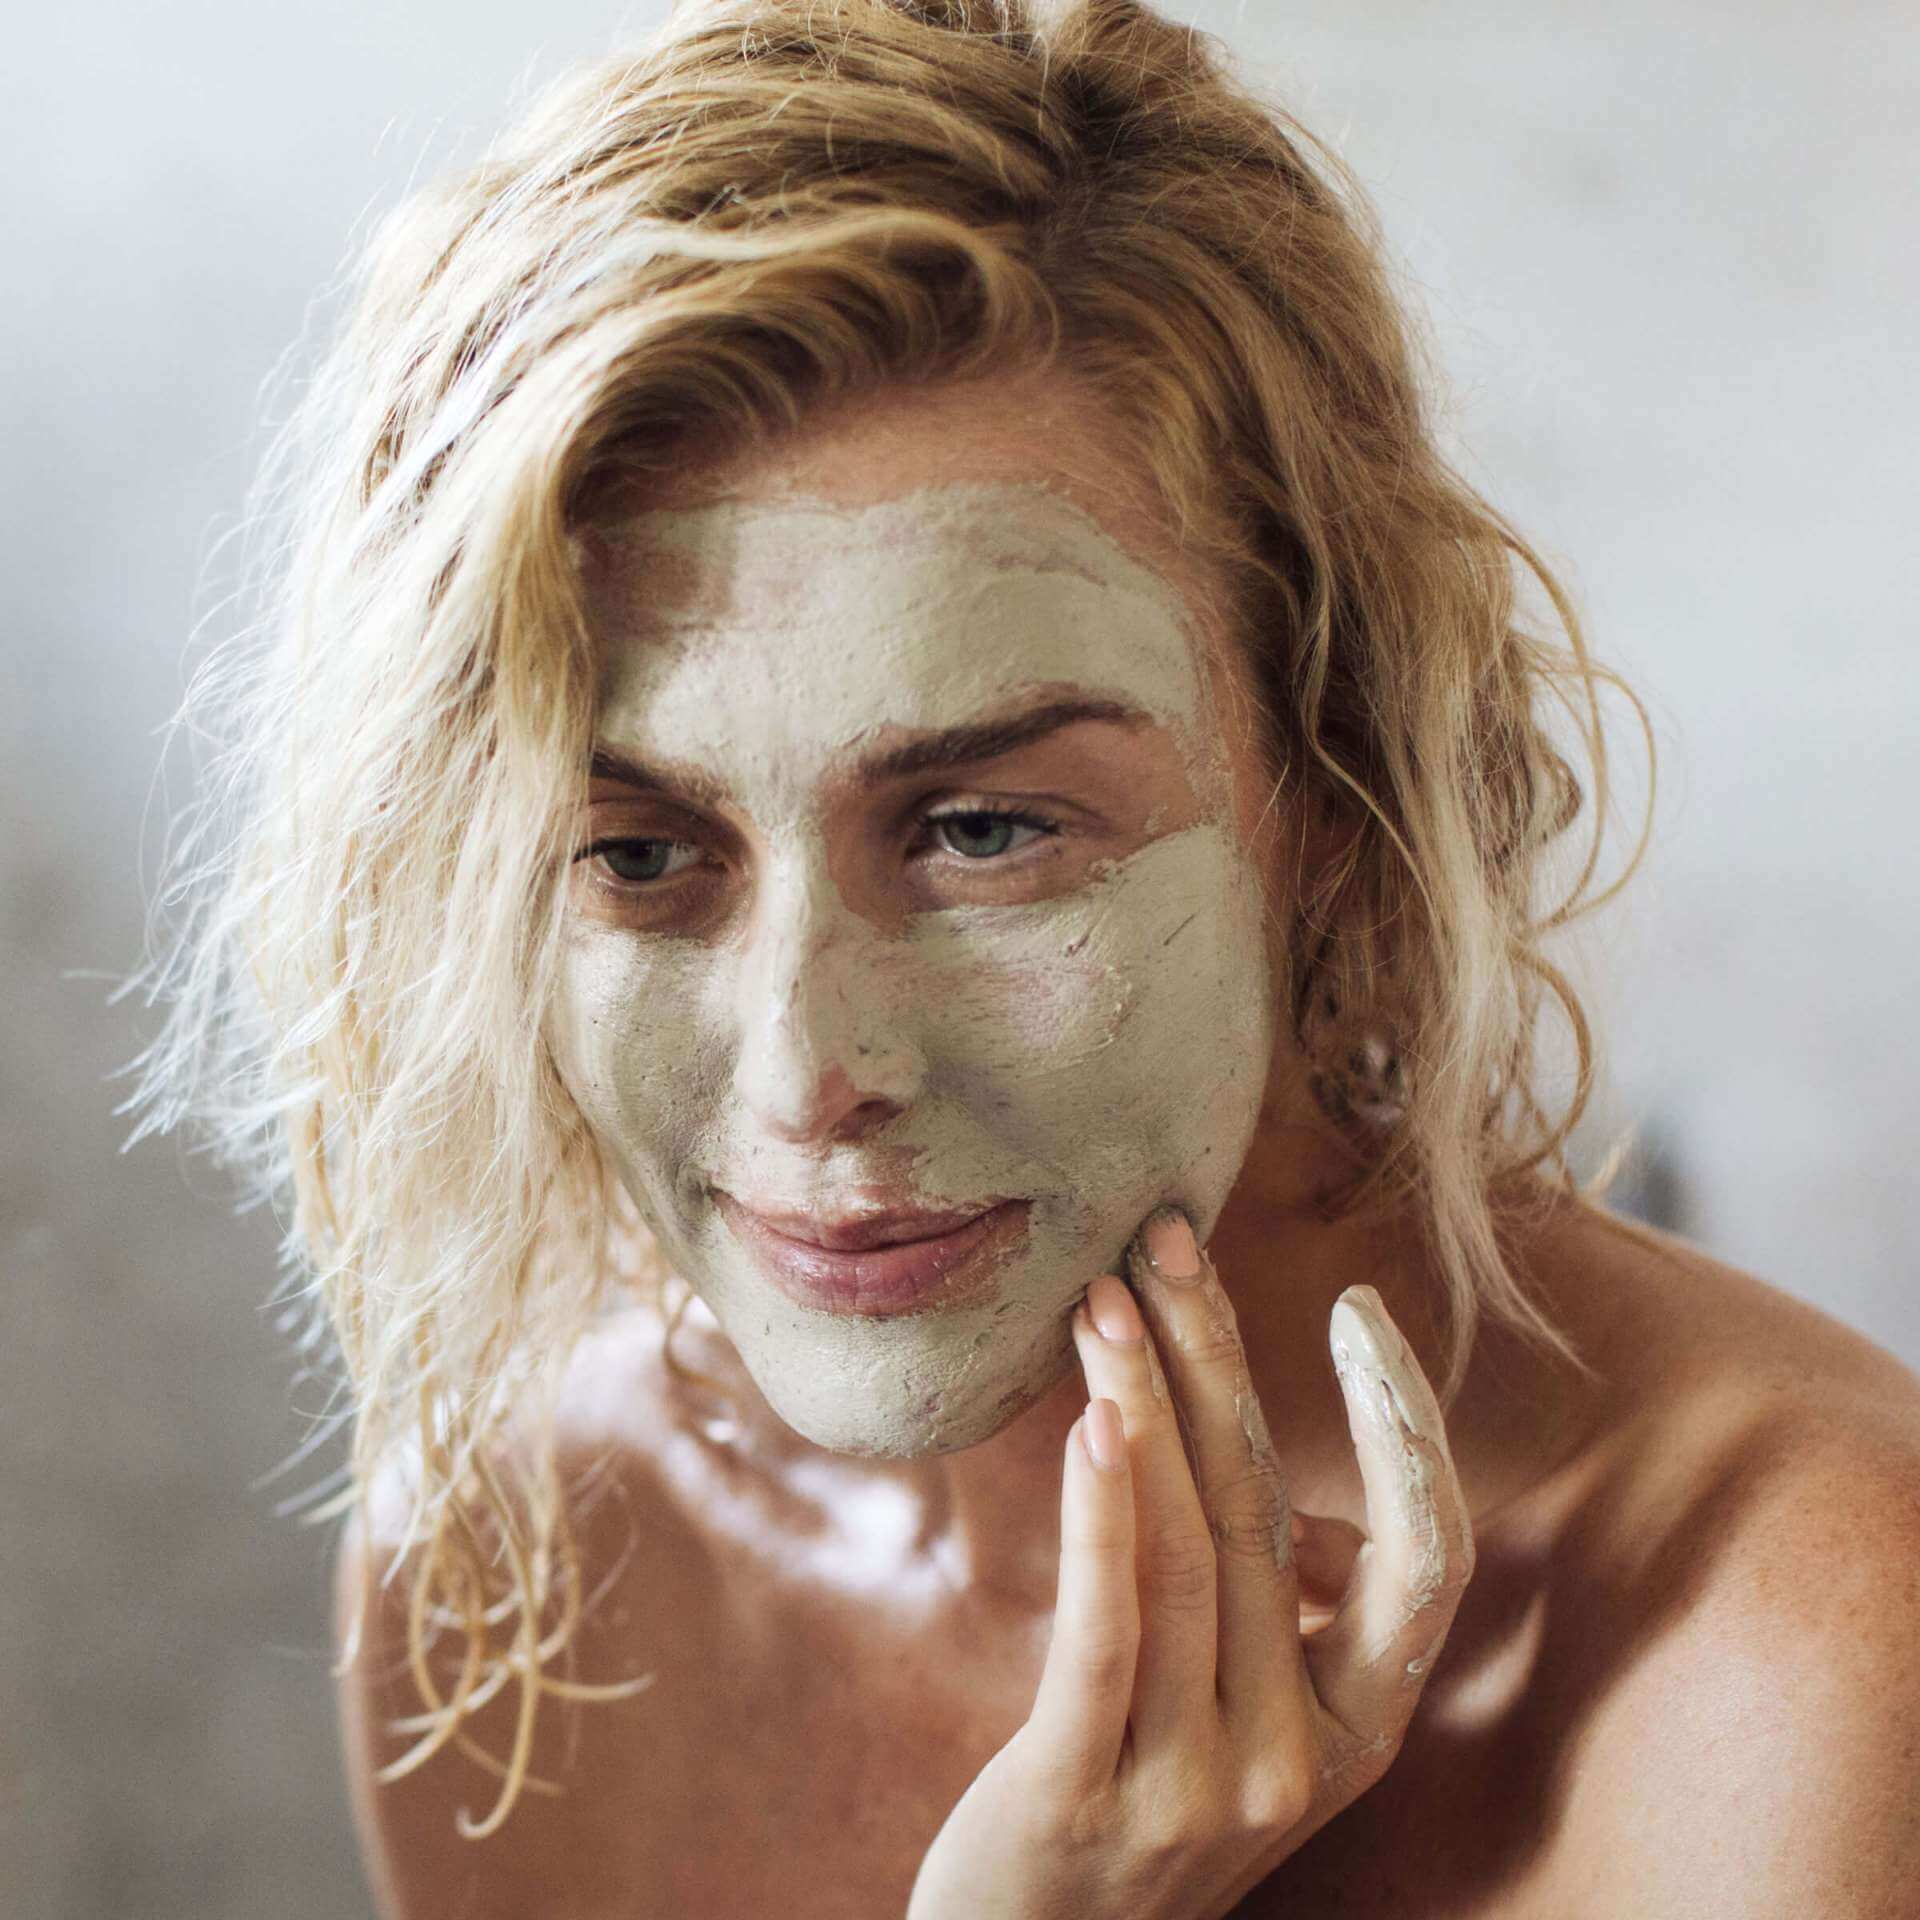 Girl with blonde hair applying green clay mask